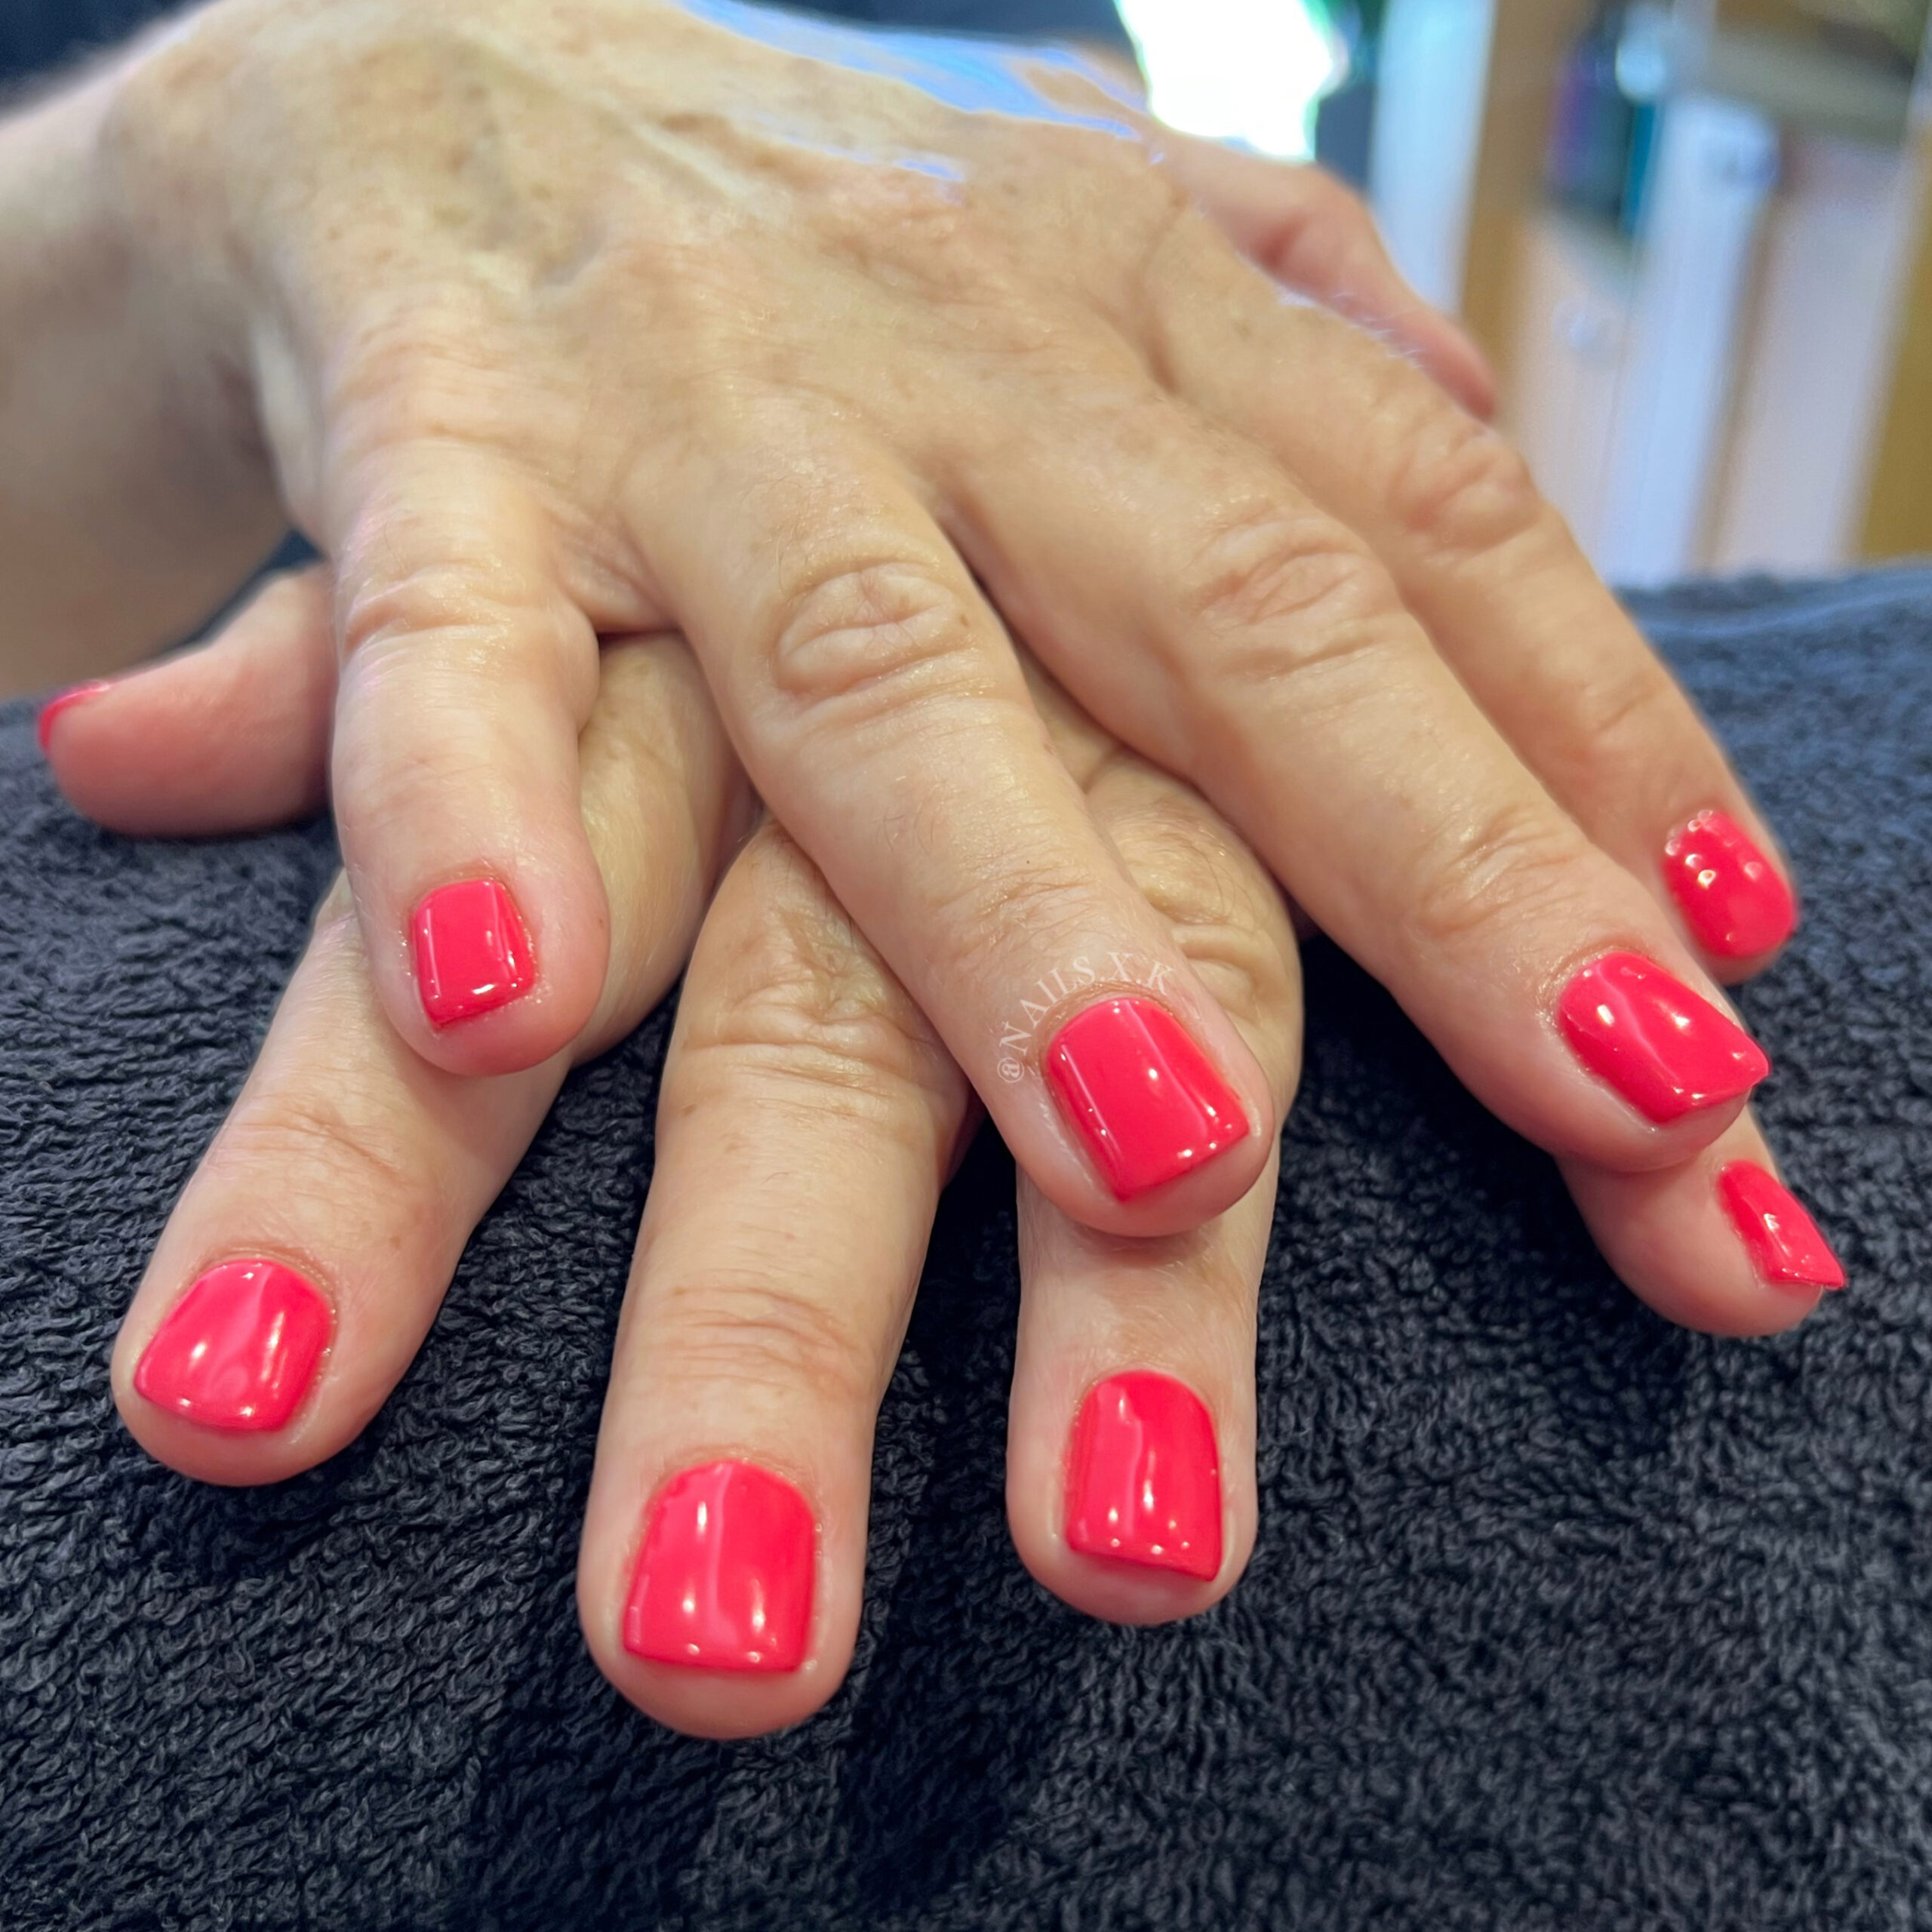 Pink flamingo gel manicure. Nails by K